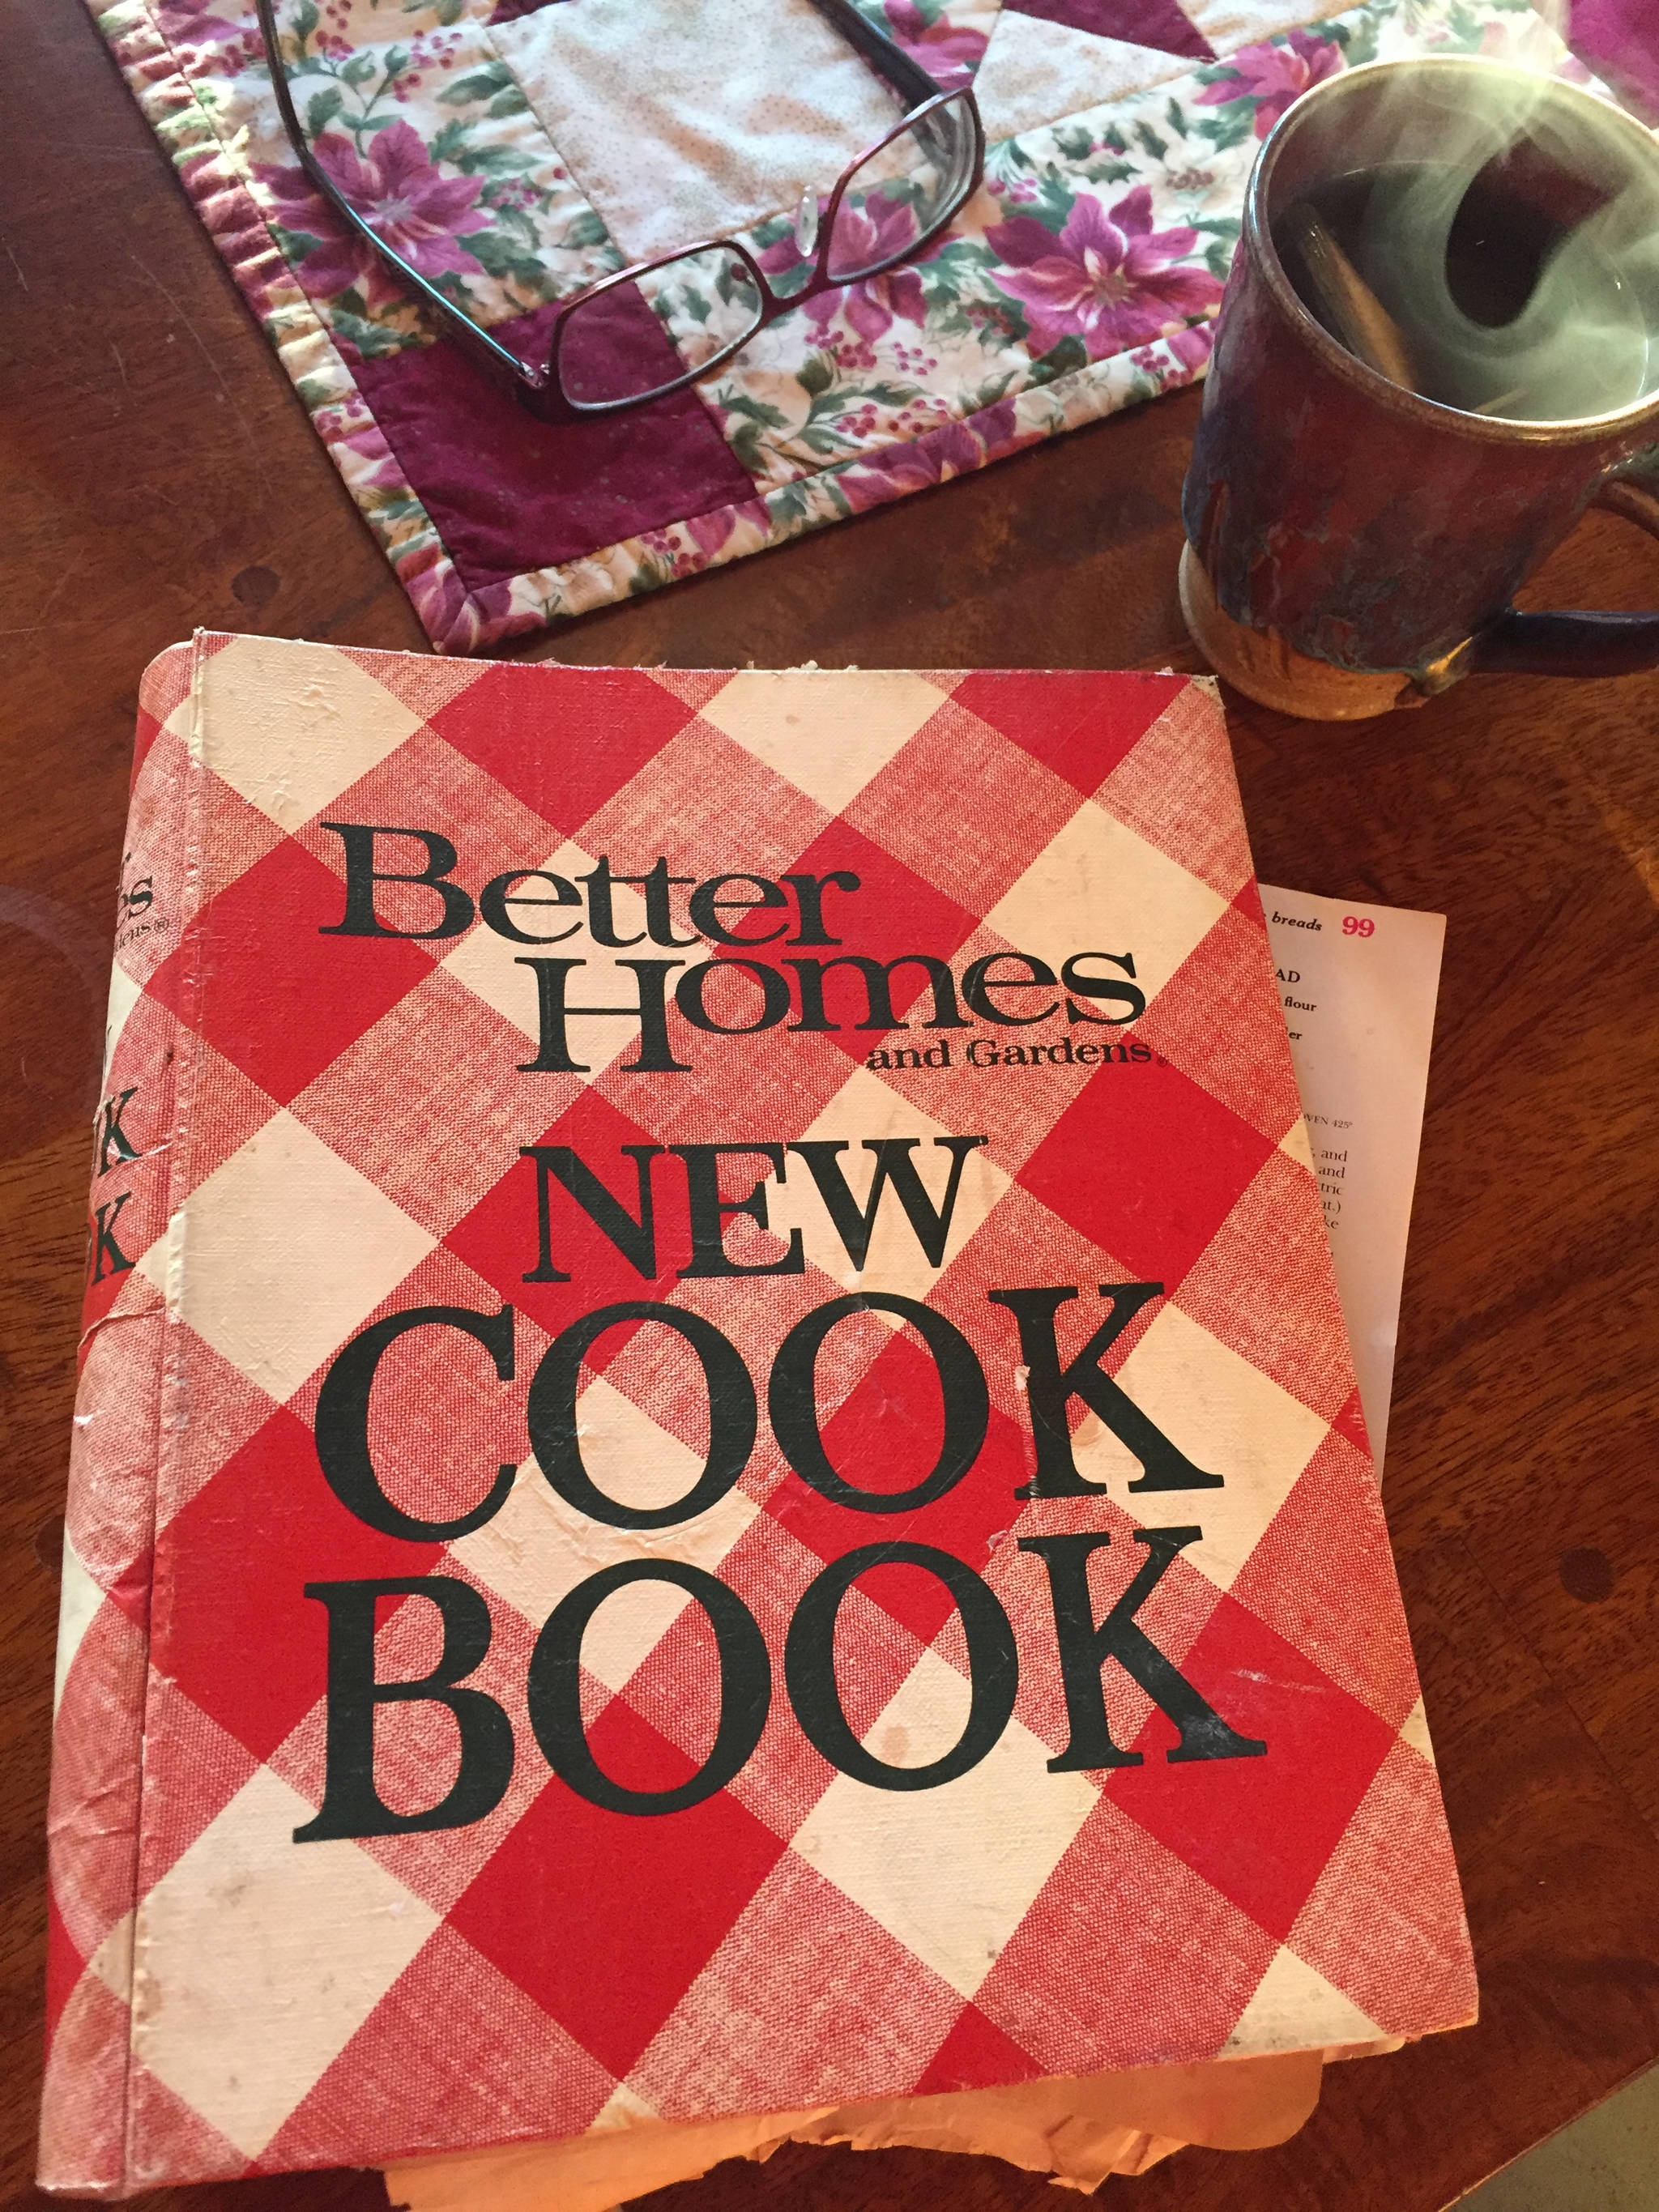 Teri Robl’s mother gave her this Better Homes New Cook Book as a wedding present on her marriage to “The Other Fisherman,” Mark Robl, 40 years ago.